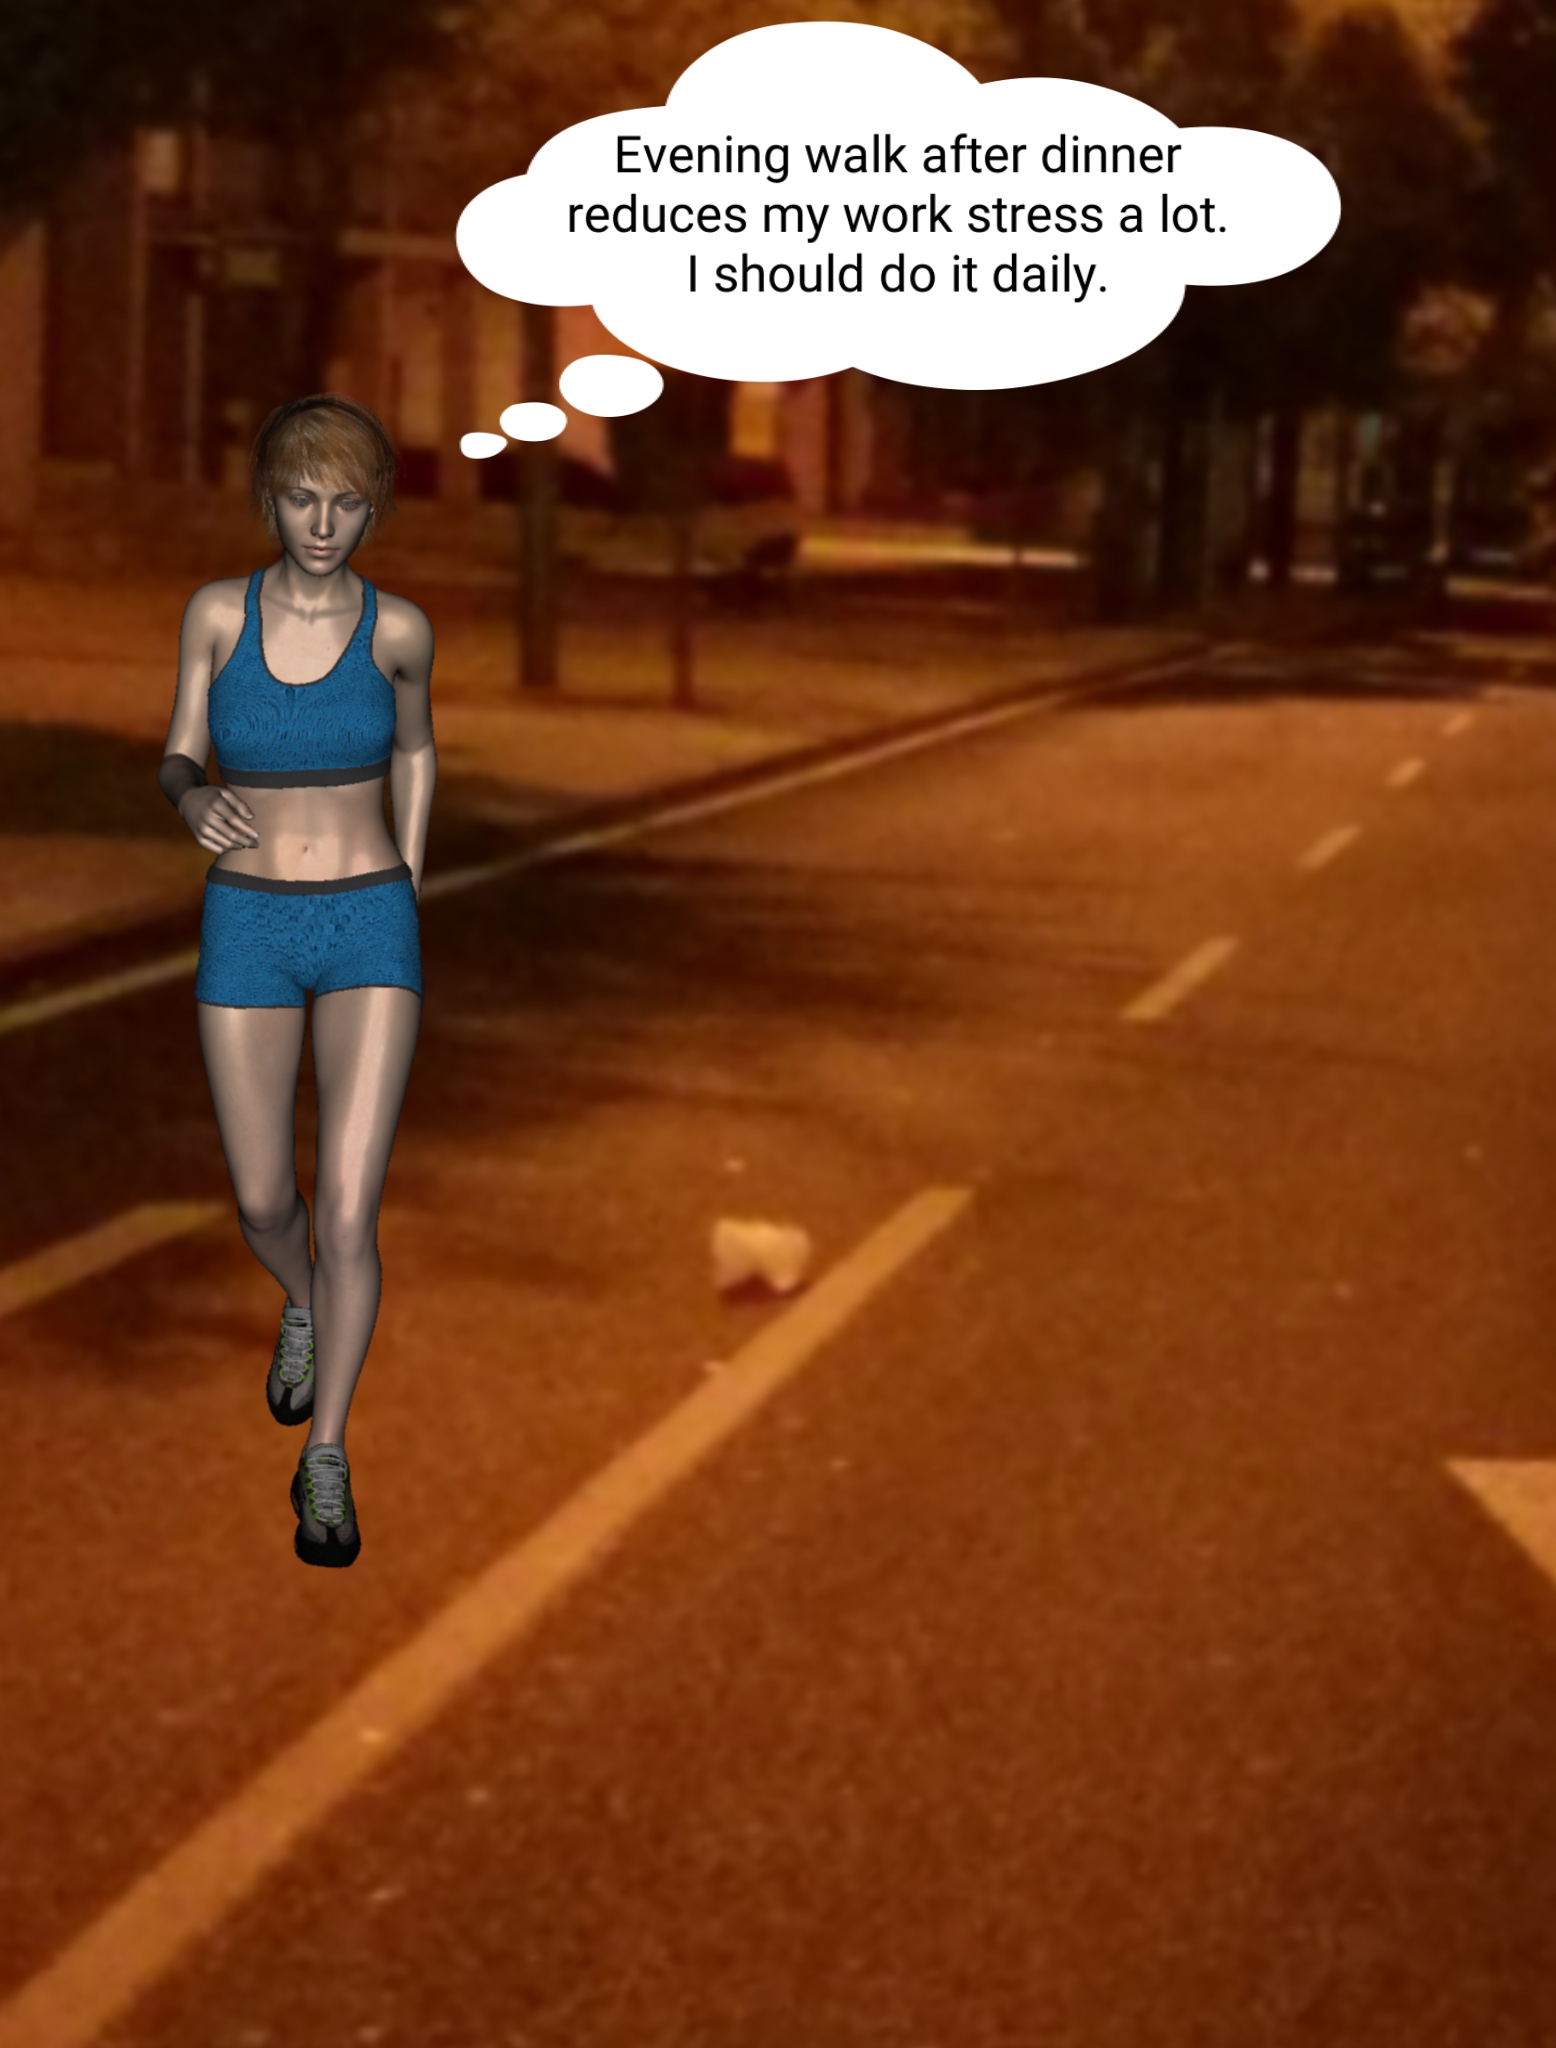 Mary Jane is jogging in a silent ally after her dinner